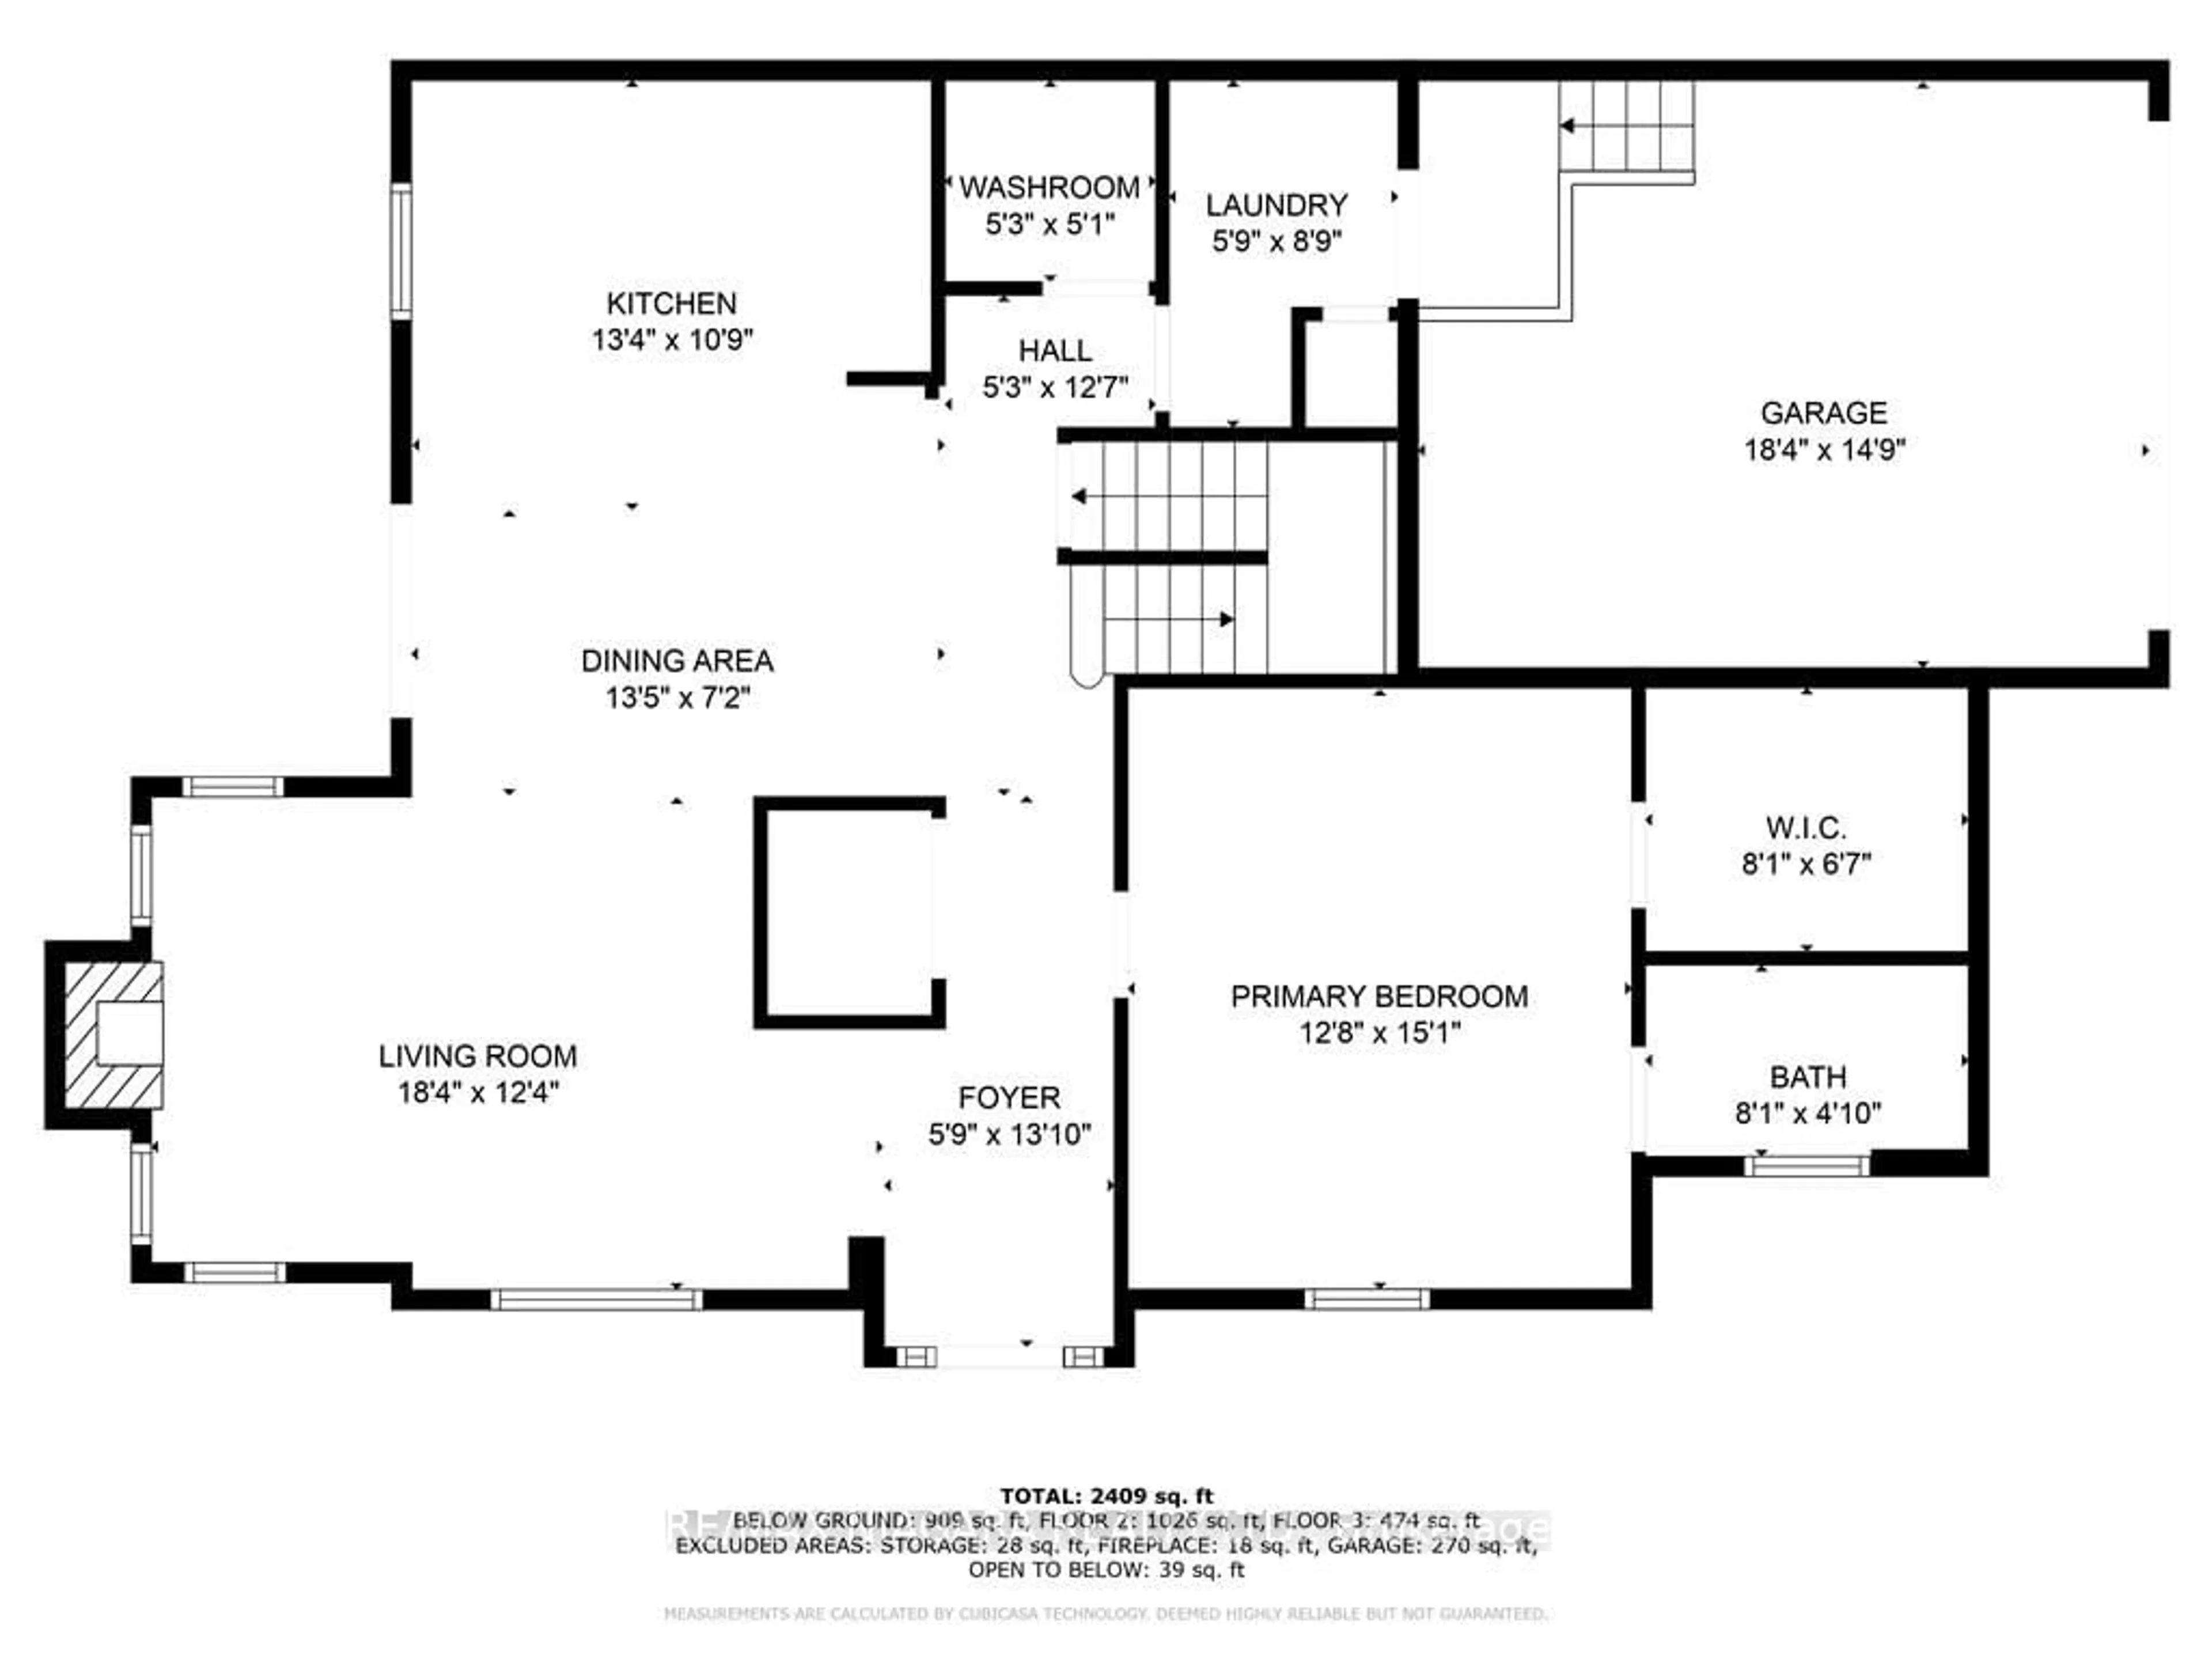 Floor plan for 288 Main St #1, Grimsby Ontario L3M 1S4